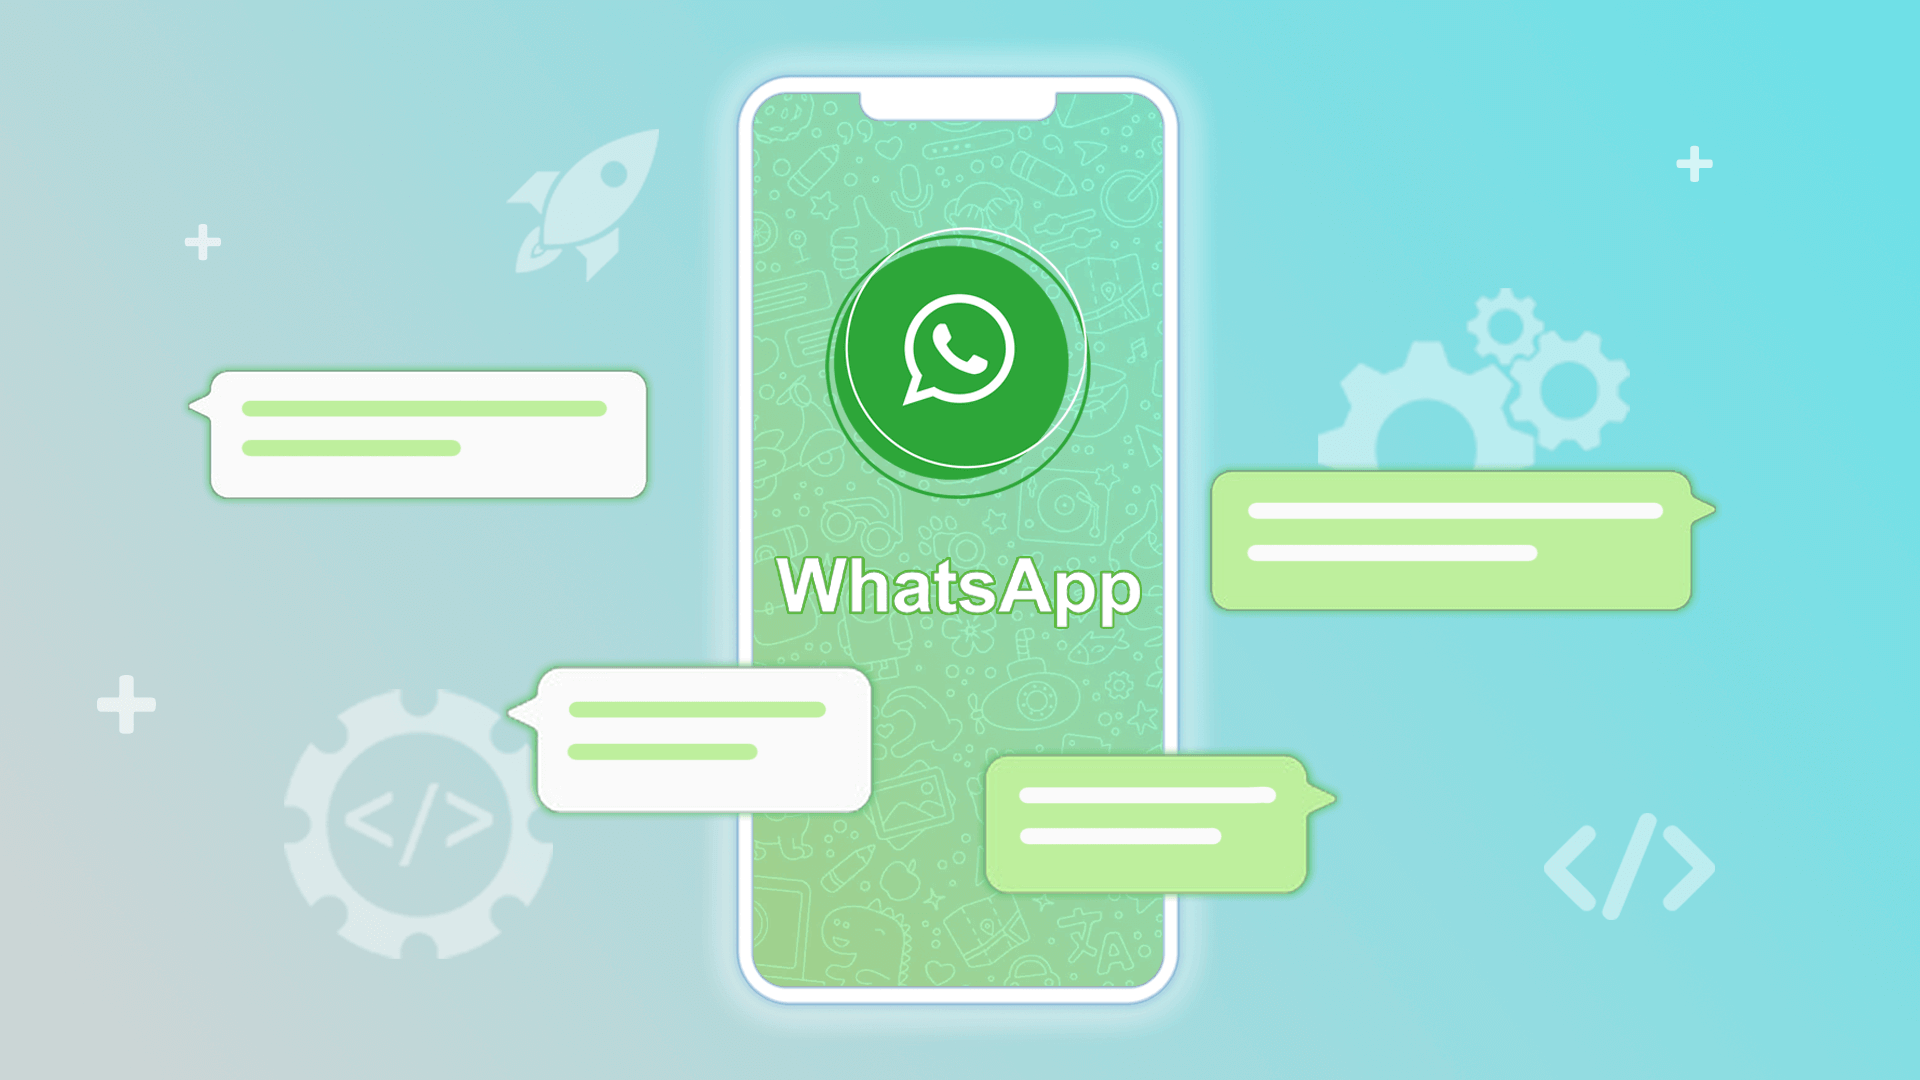 How Much Does It Cost to Develop an App Like WhatsApp